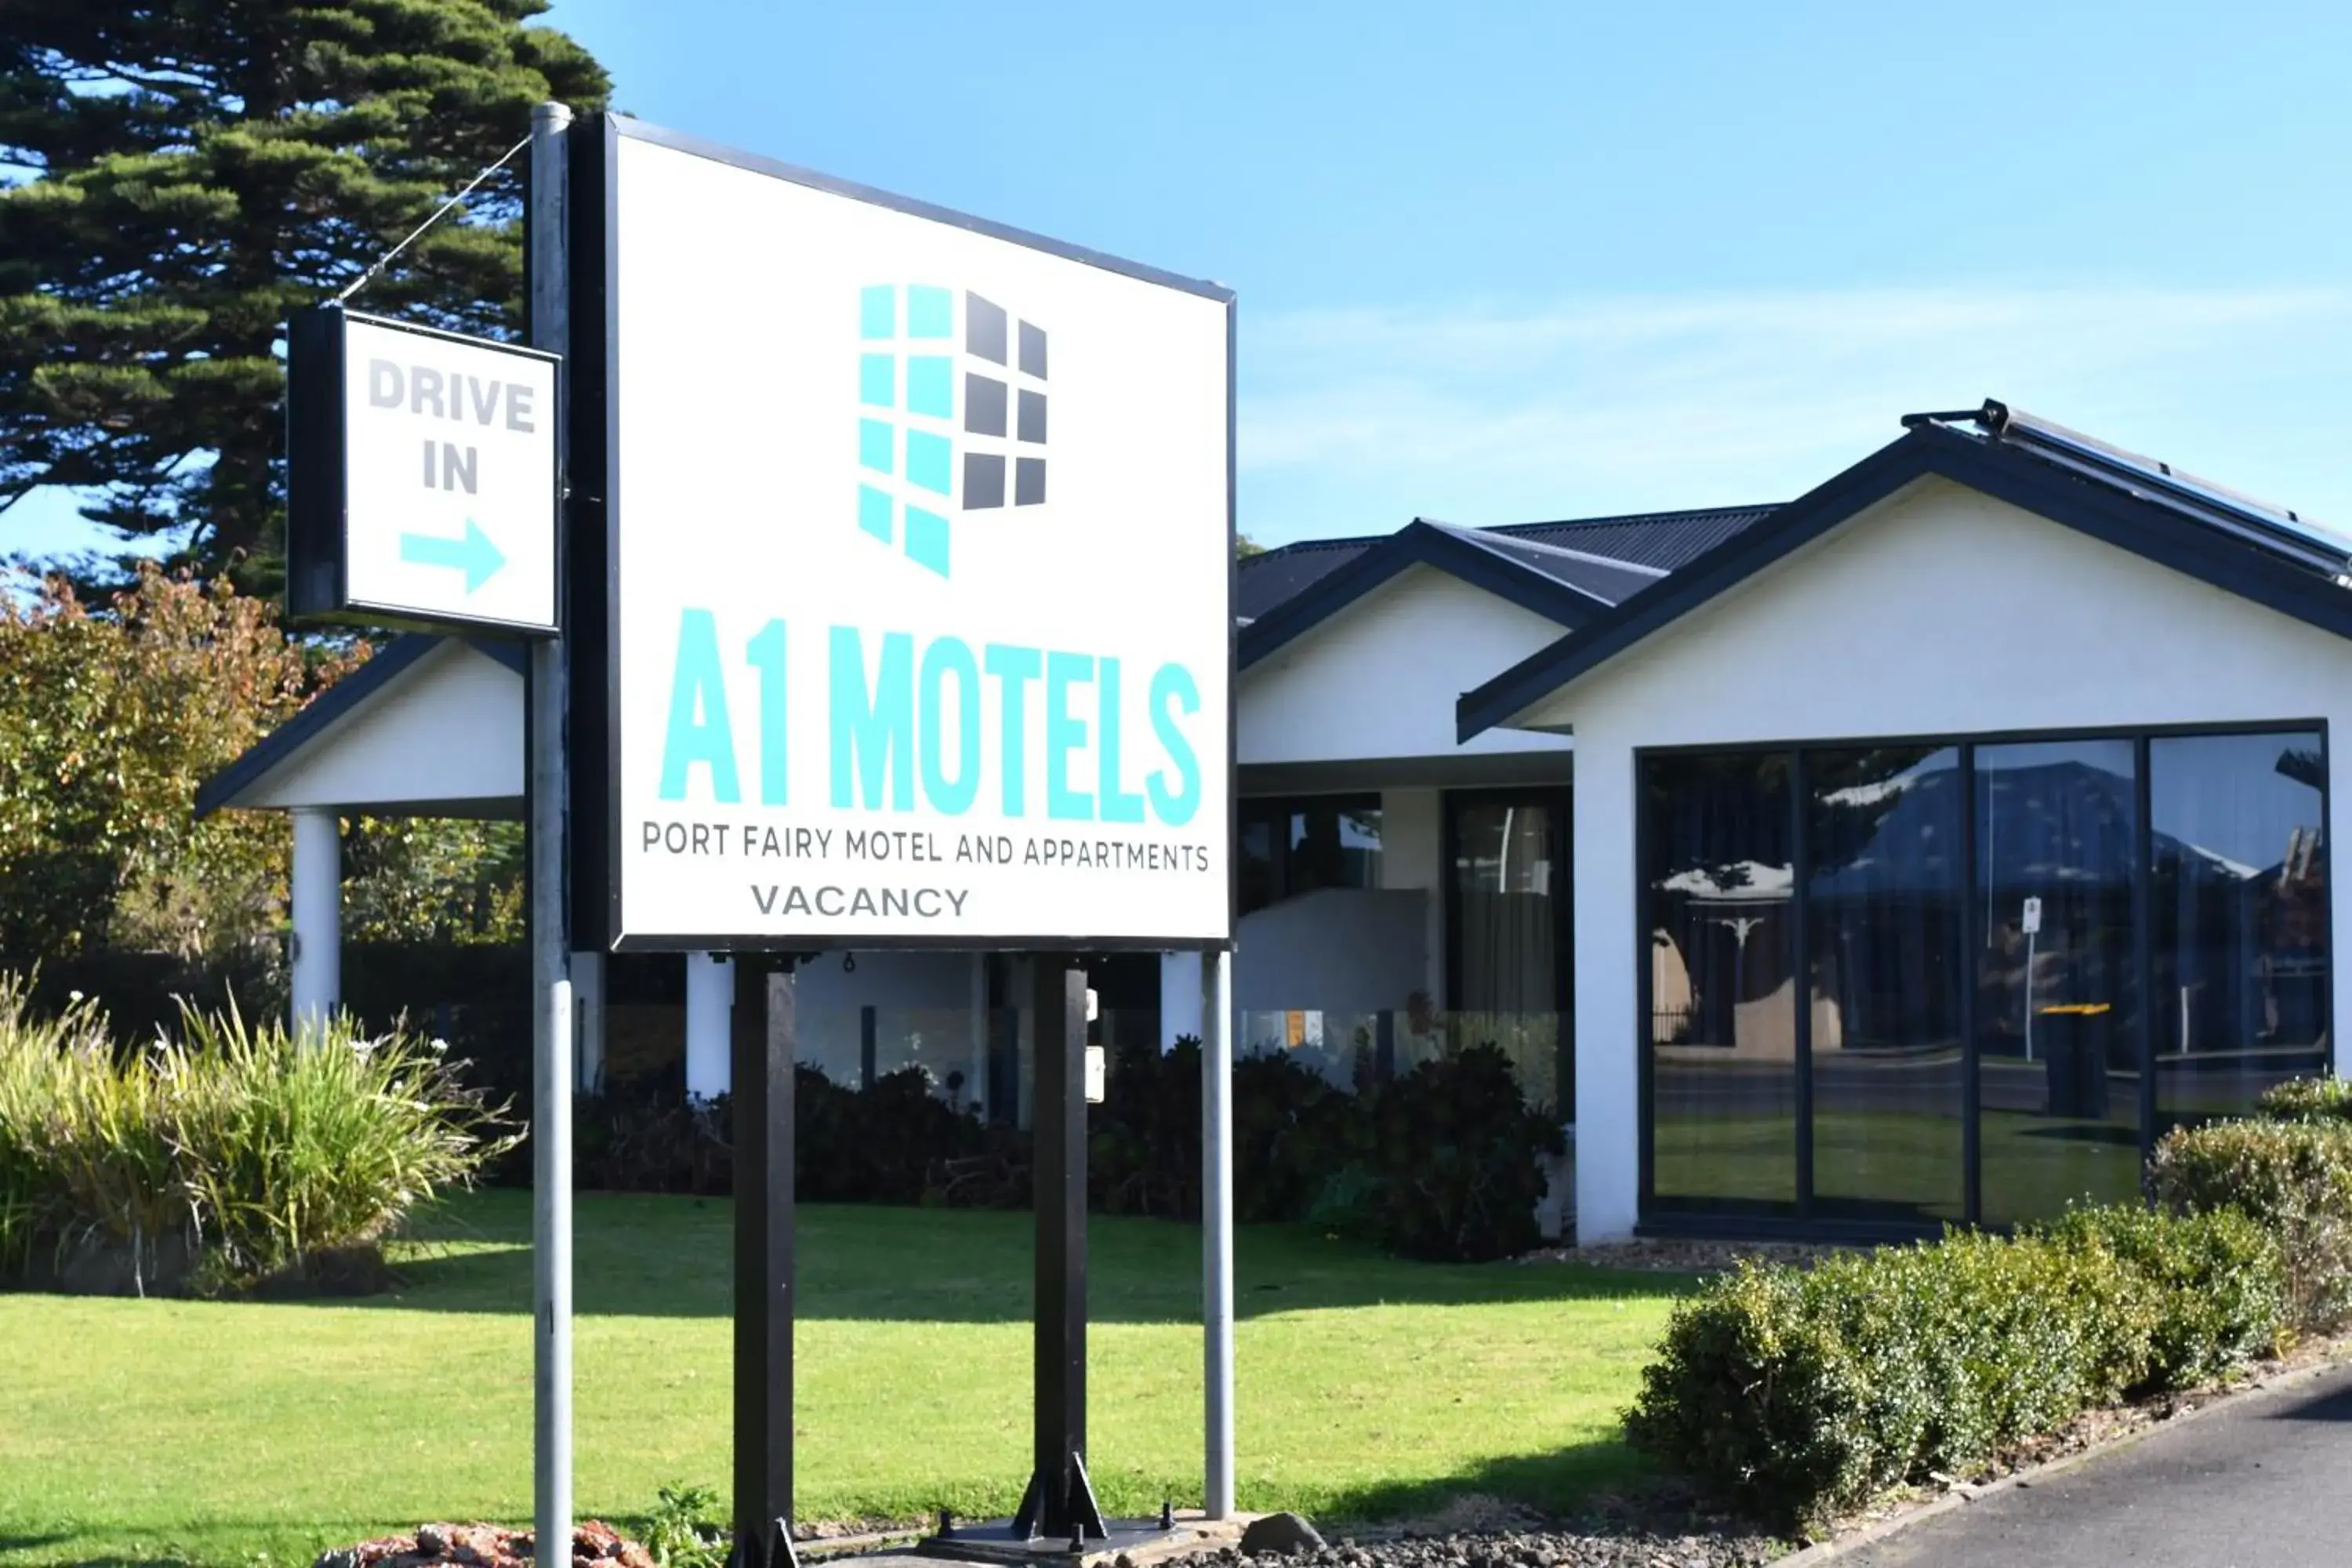 Facade/entrance, Property Building in A1 Motels and Apartments Port Fairy